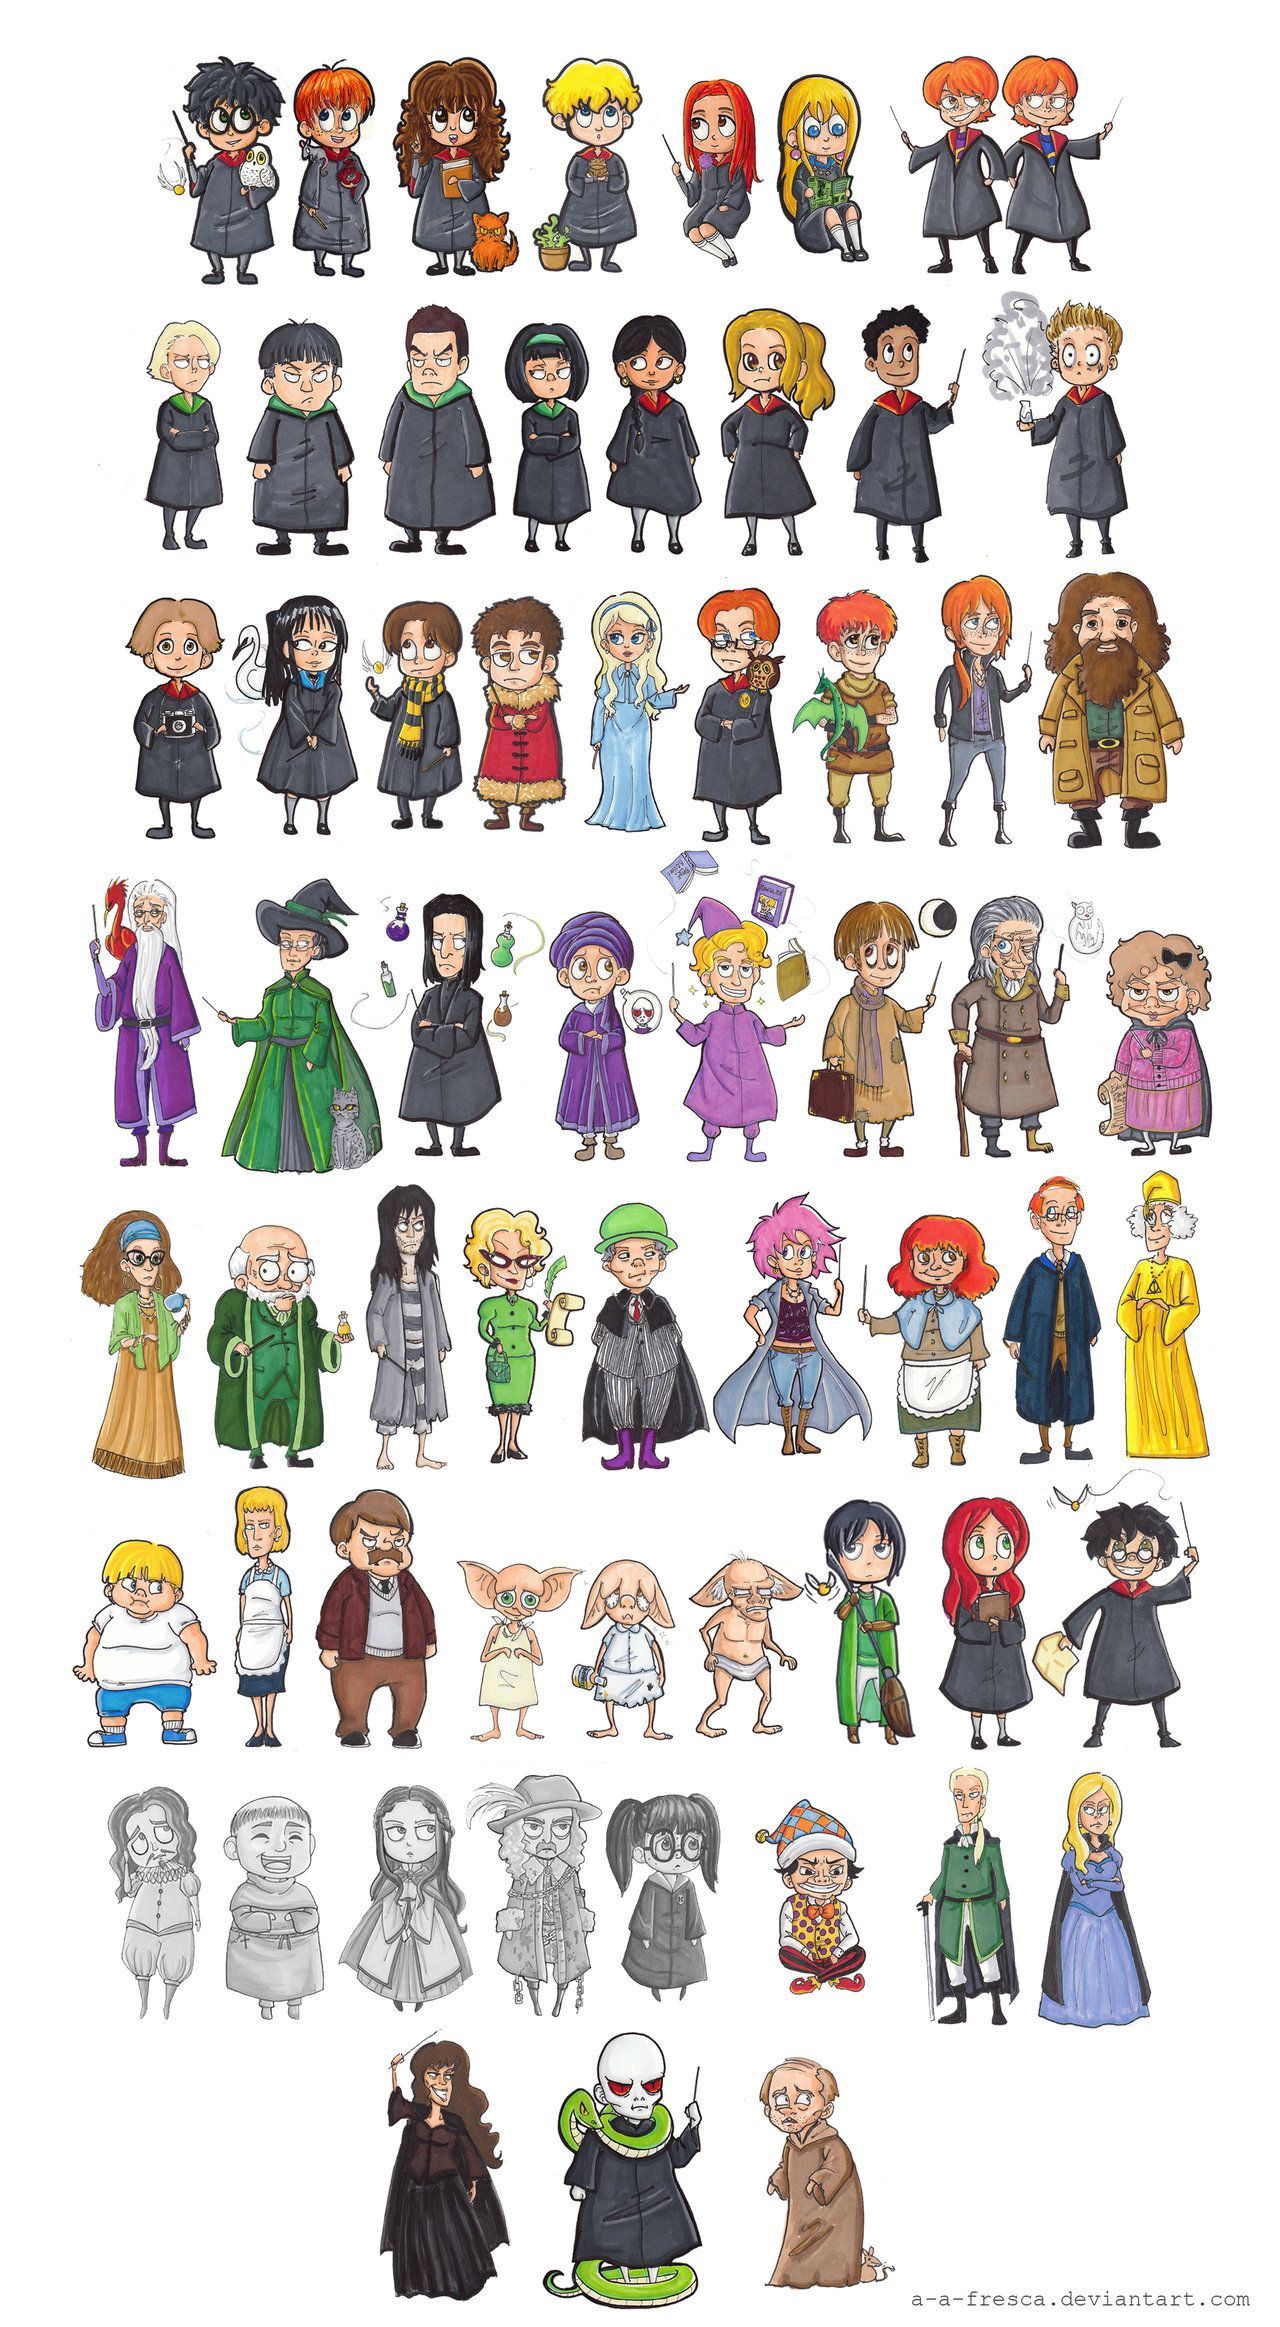 Harry Potter - Characters by A-A-Fresca.deviantart.com on @deviantART -   25 harry potter characters
 ideas